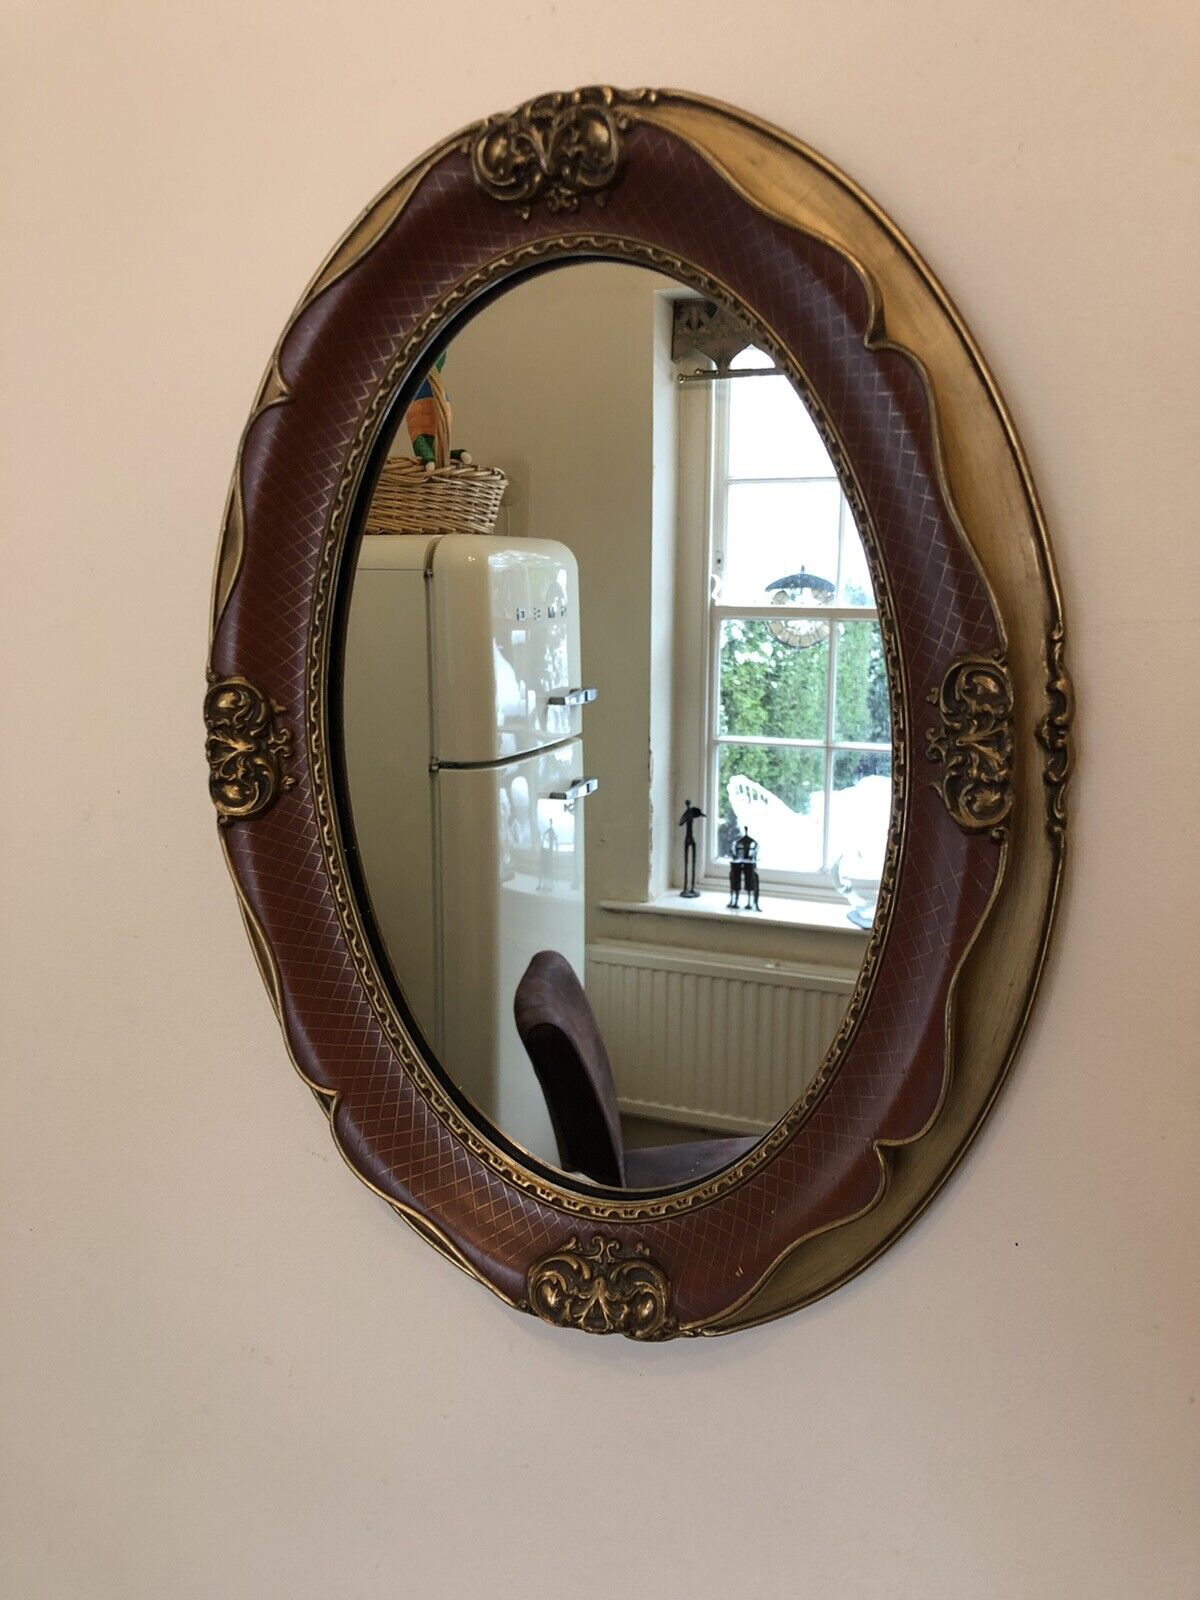 Beautiful Vintage Oval Ornate Mirror a really great item